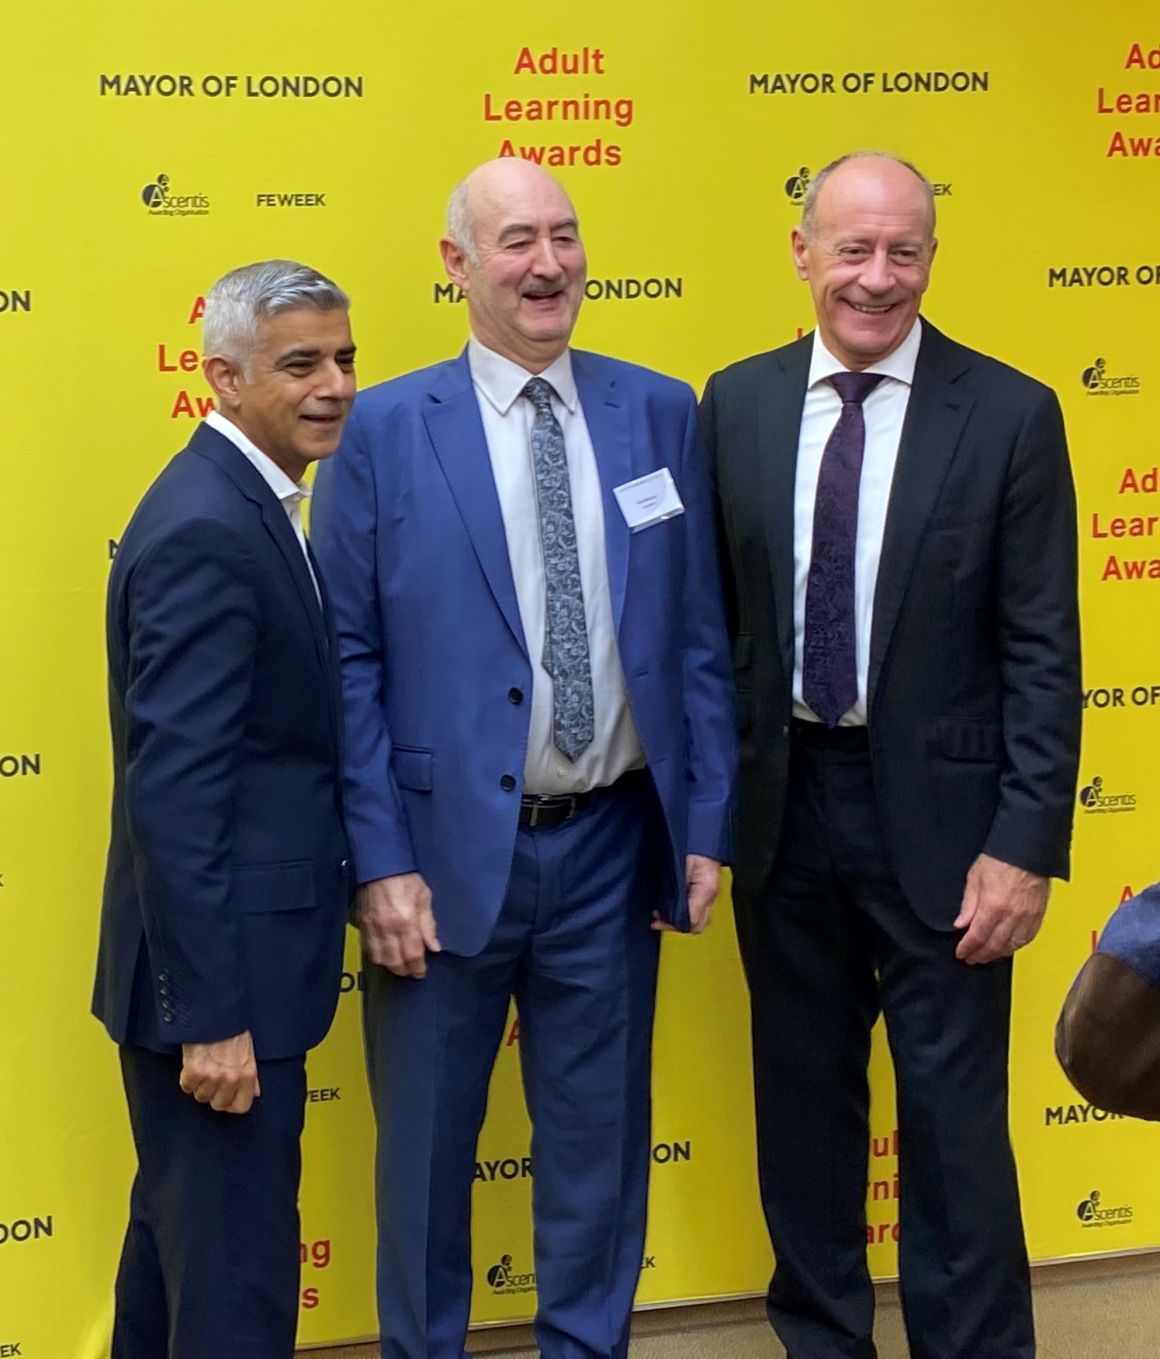 Ascentis are delighted to support the Mayor of London’s Adult Learning Awards 2023